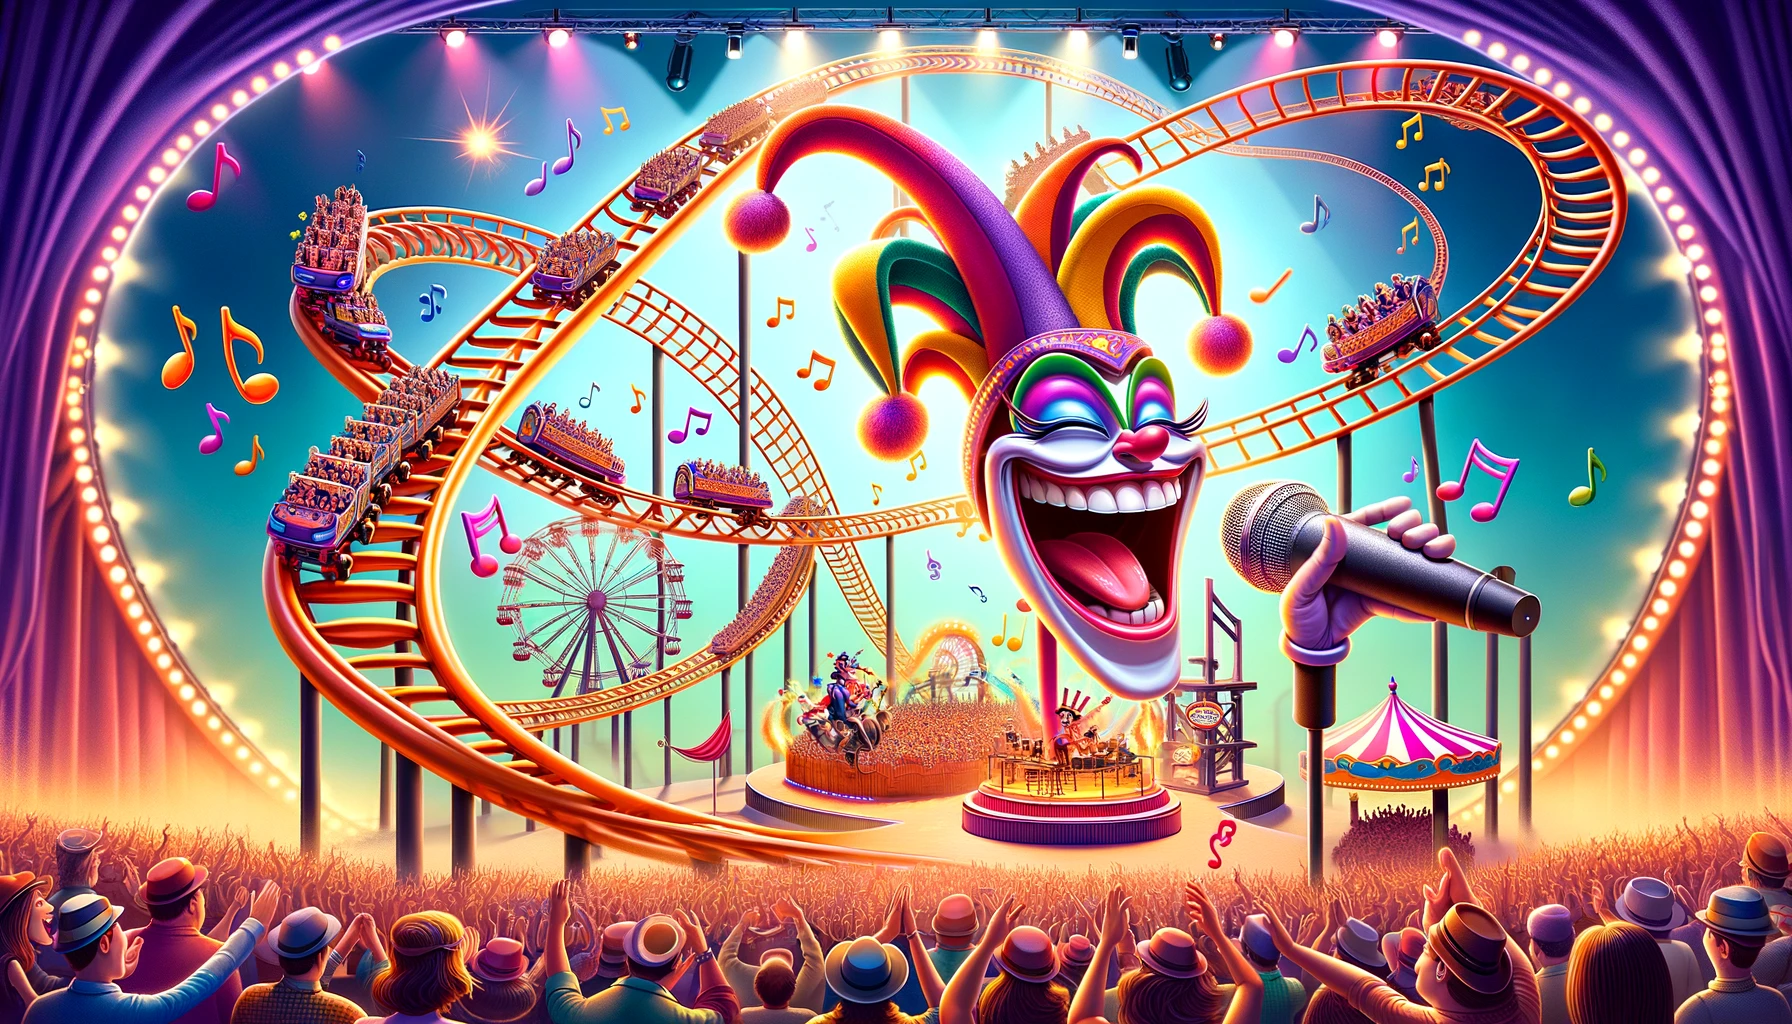 The roller coaster, who is now a musician, has a knack for hitting high notes with a joster! - Roller Coaster Pun